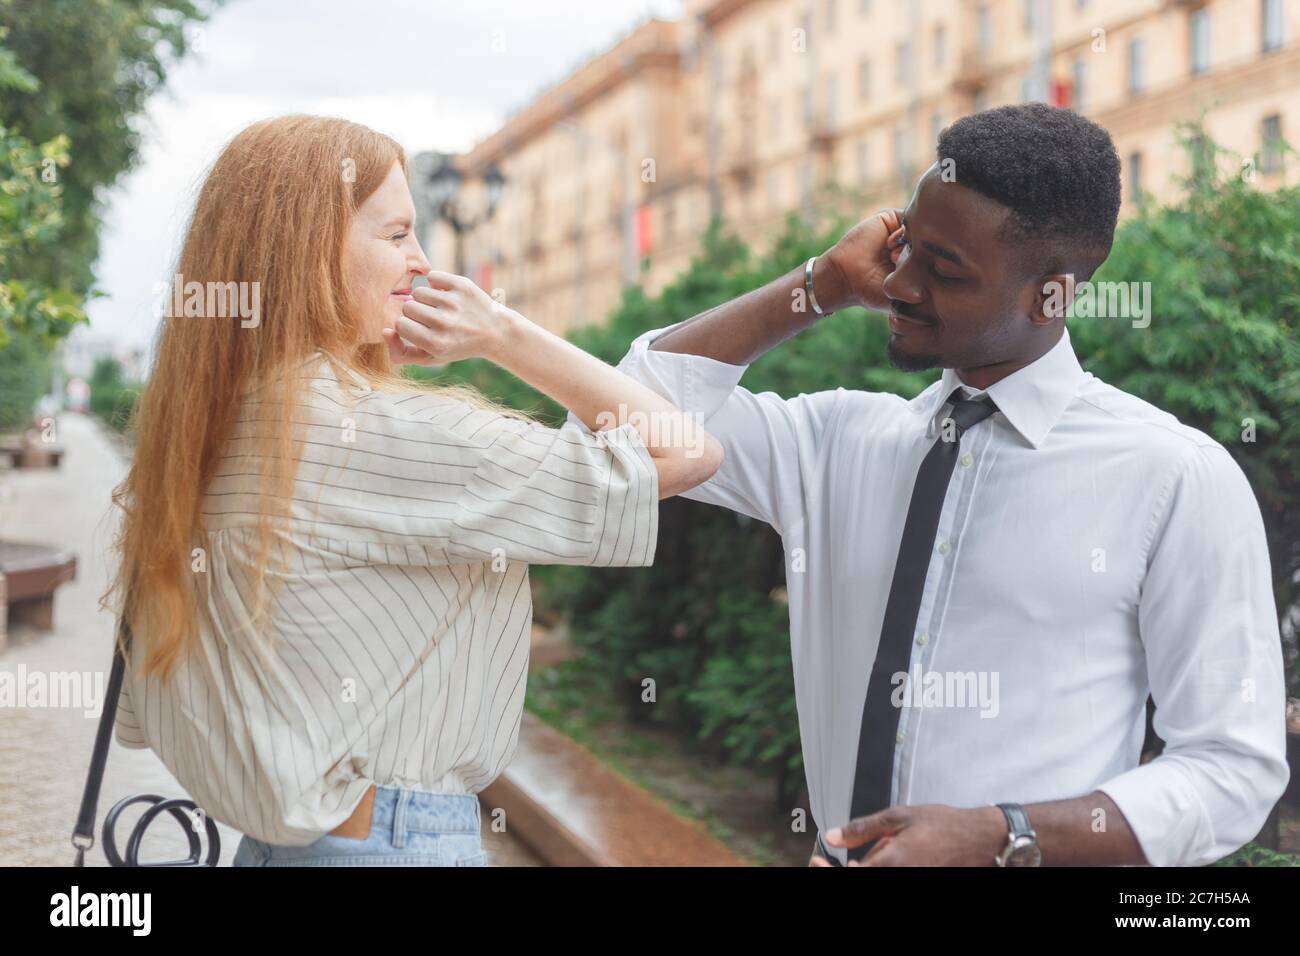 Elbow bump greeting to avoid the spread of coronavirus. Black man and caucasian woman use elbows instead palms for greeting Stock Photo